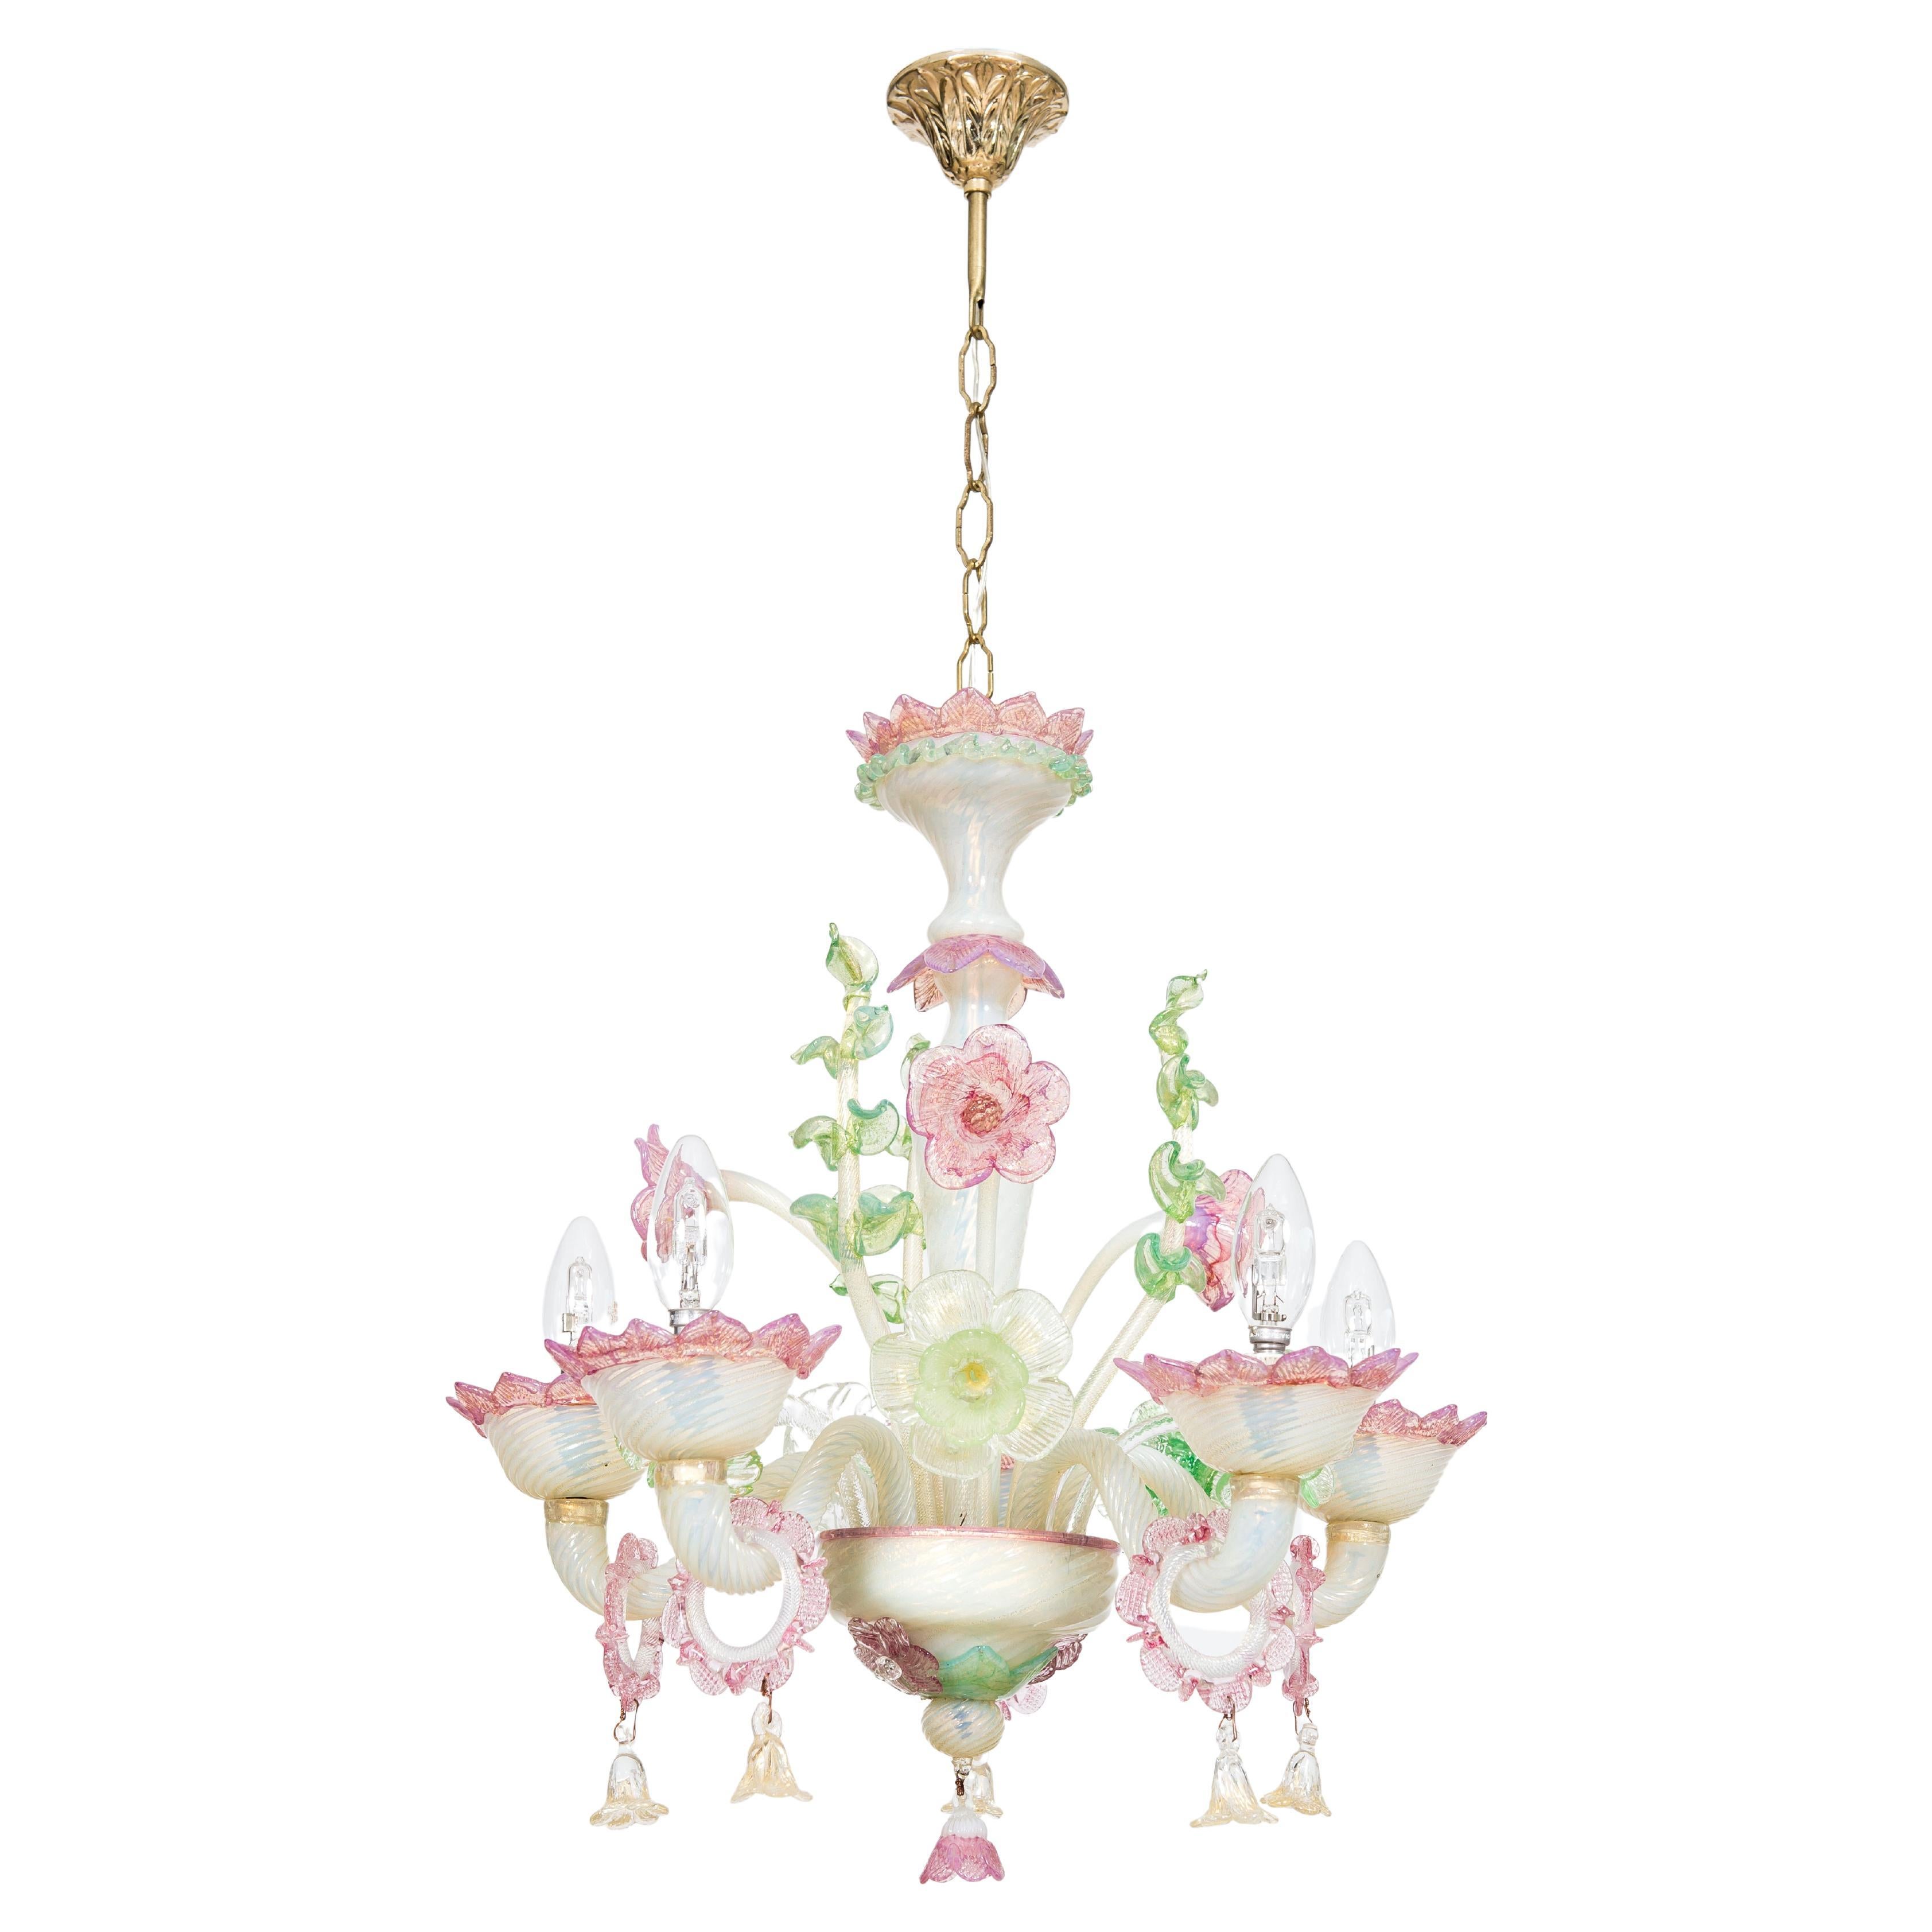 Floral Opaline Murano Glass Chandelier with Gold Handcrafted in Italy 1900s 